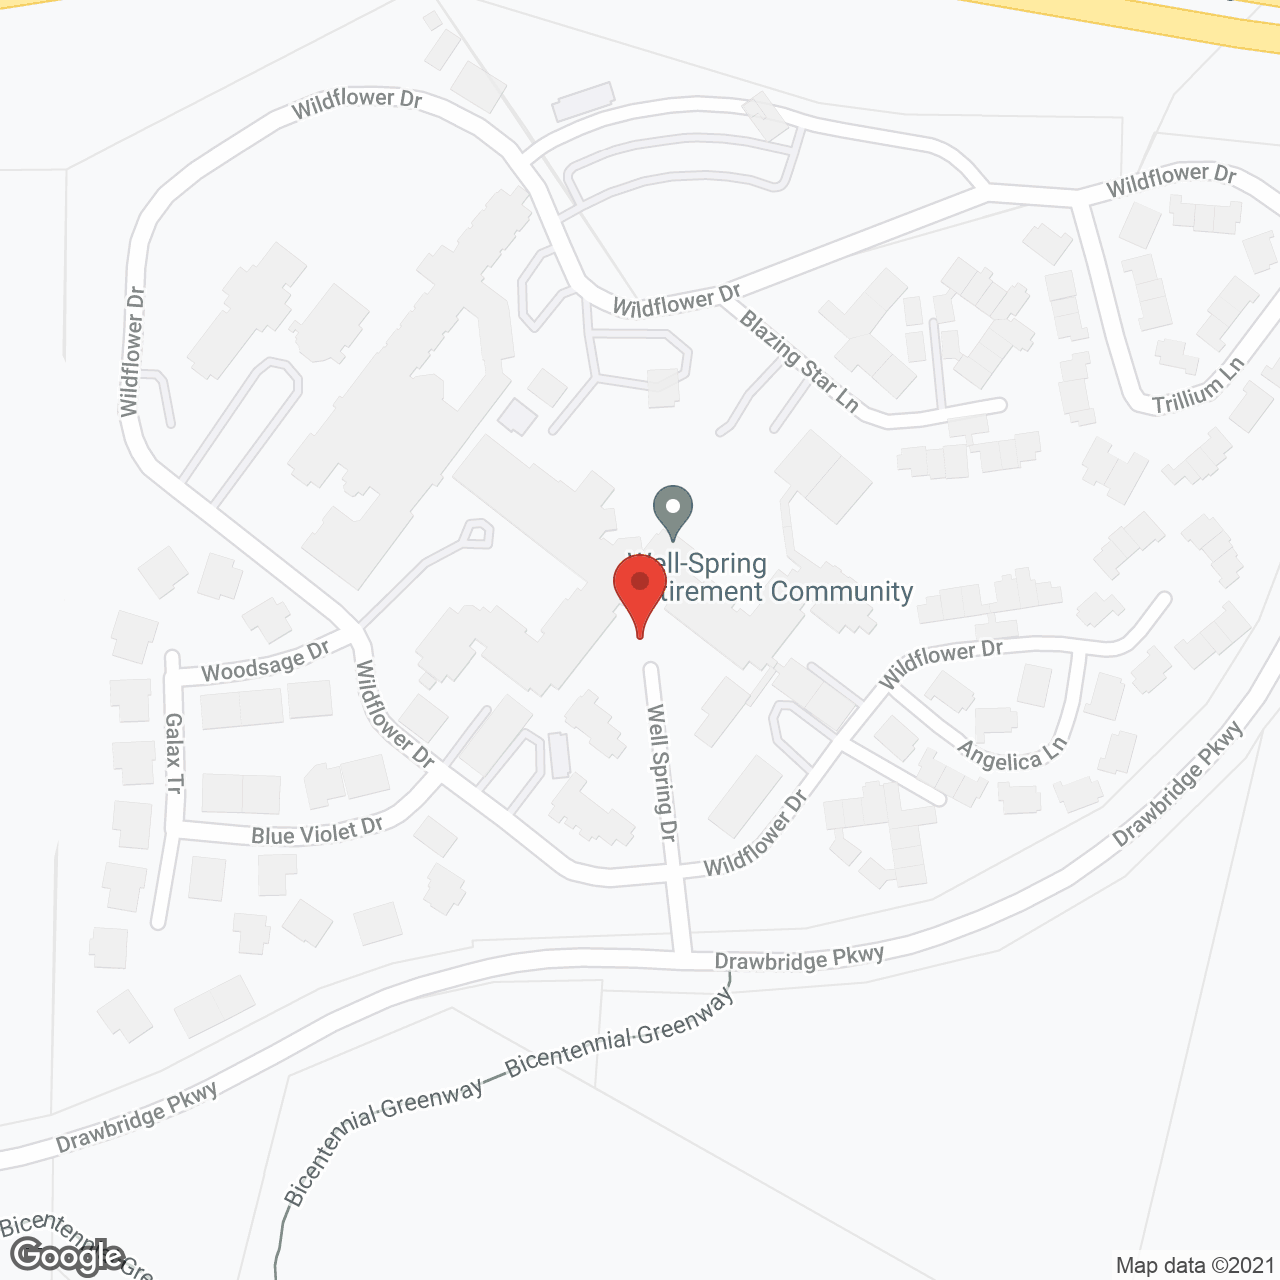 Well-Spring Retirement Community in google map